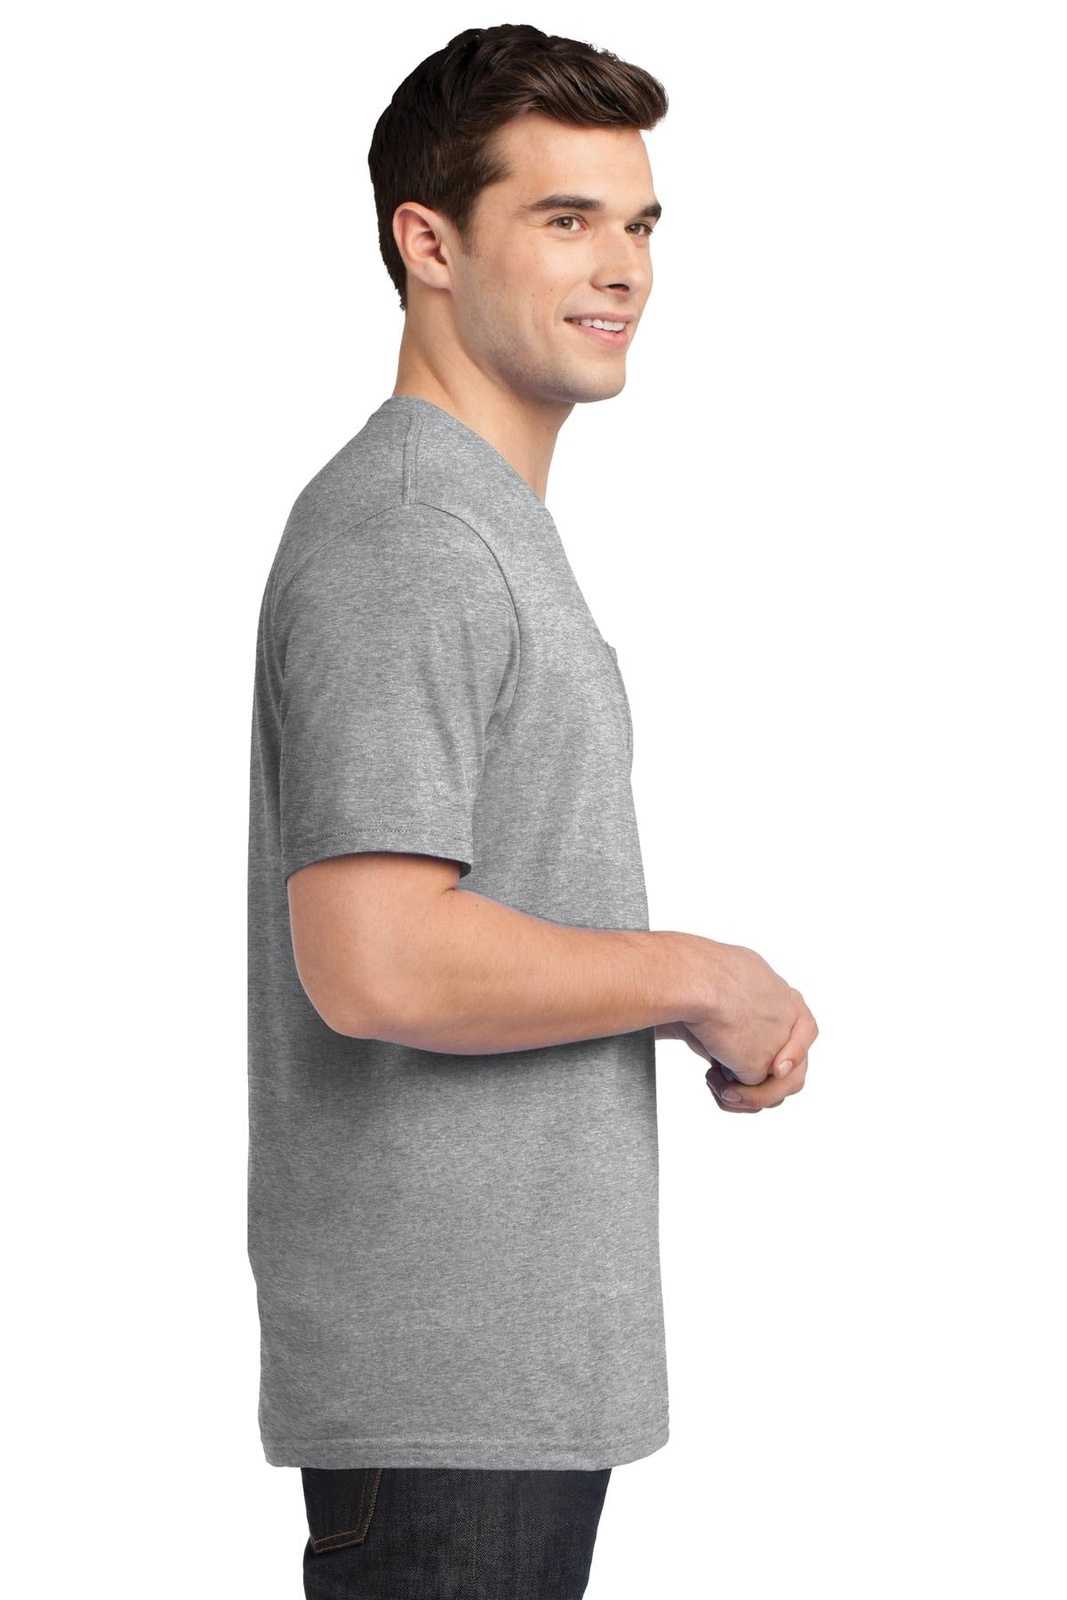 District DT6000P Very Important Tee with Pocket - Light Heather Gray - HIT a Double - 3